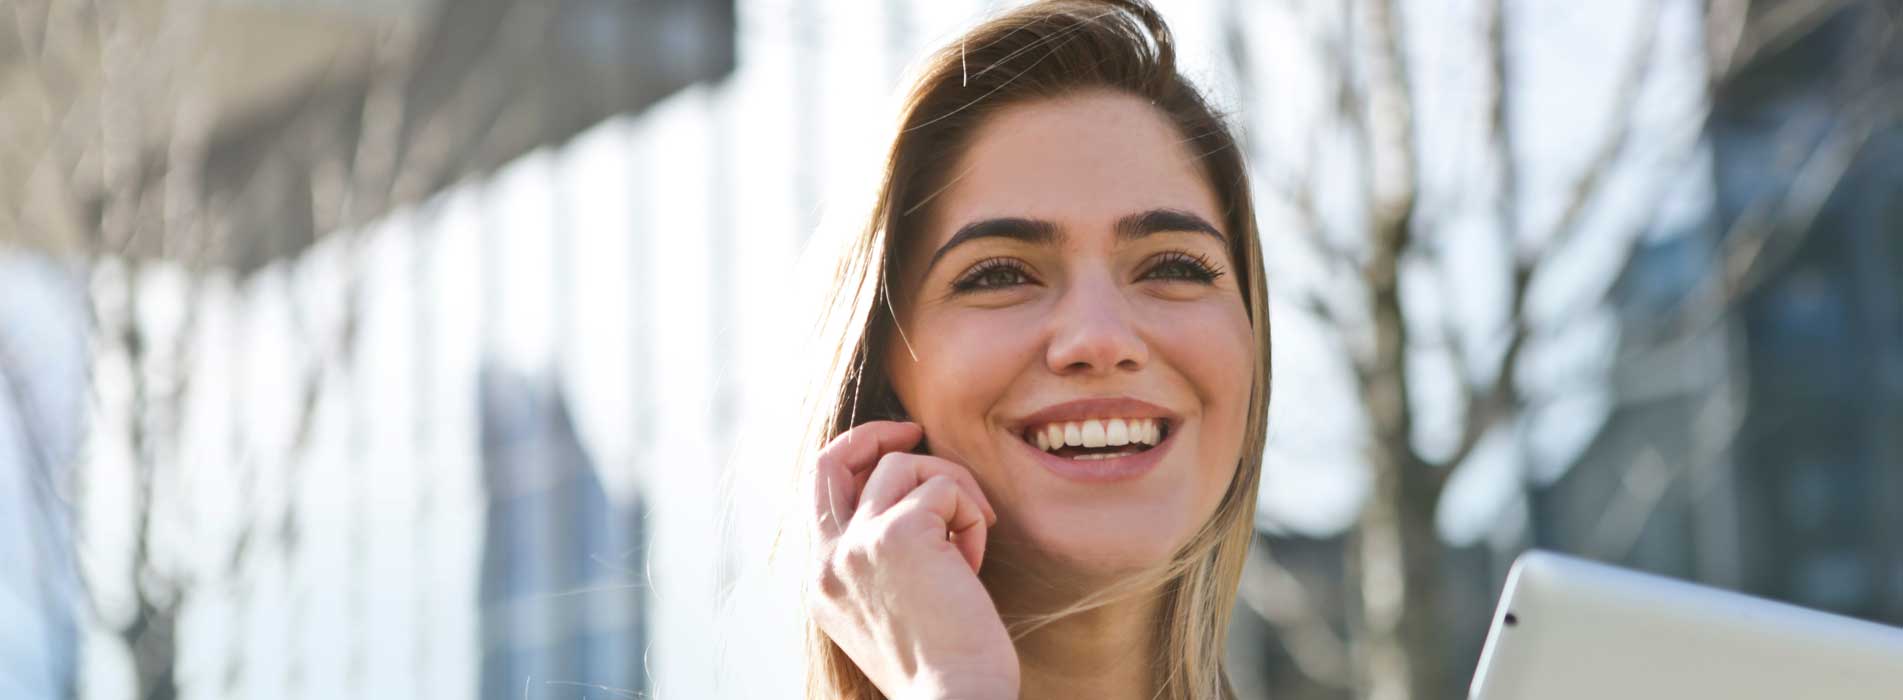 Woman Smiling While On Phone